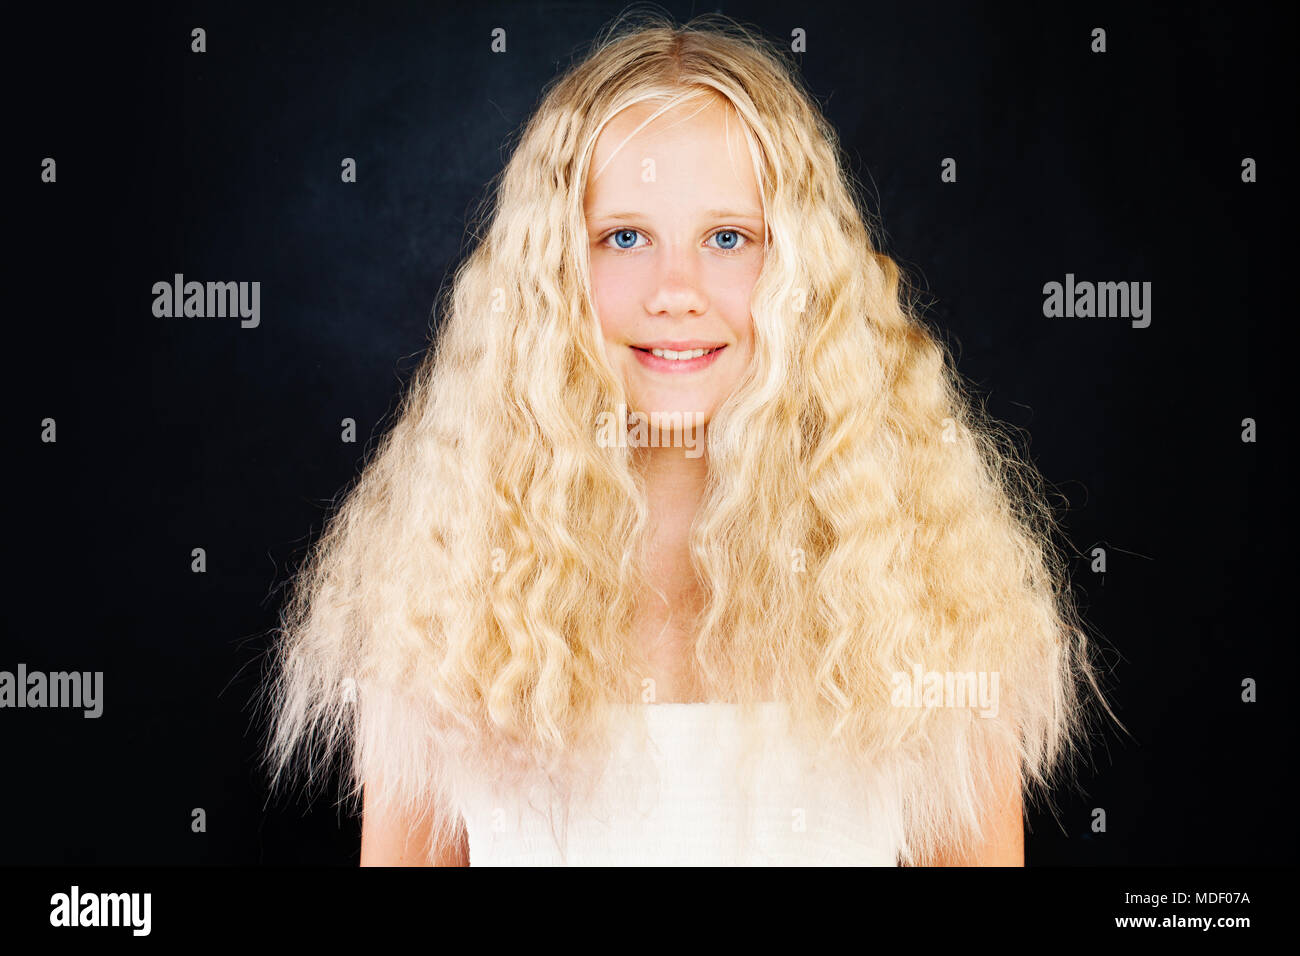 Cute Young Girl with Blonde Curly Hair. Blonde Teen Girl with Curly Hair on  Dark Background Stock Photo - Alamy